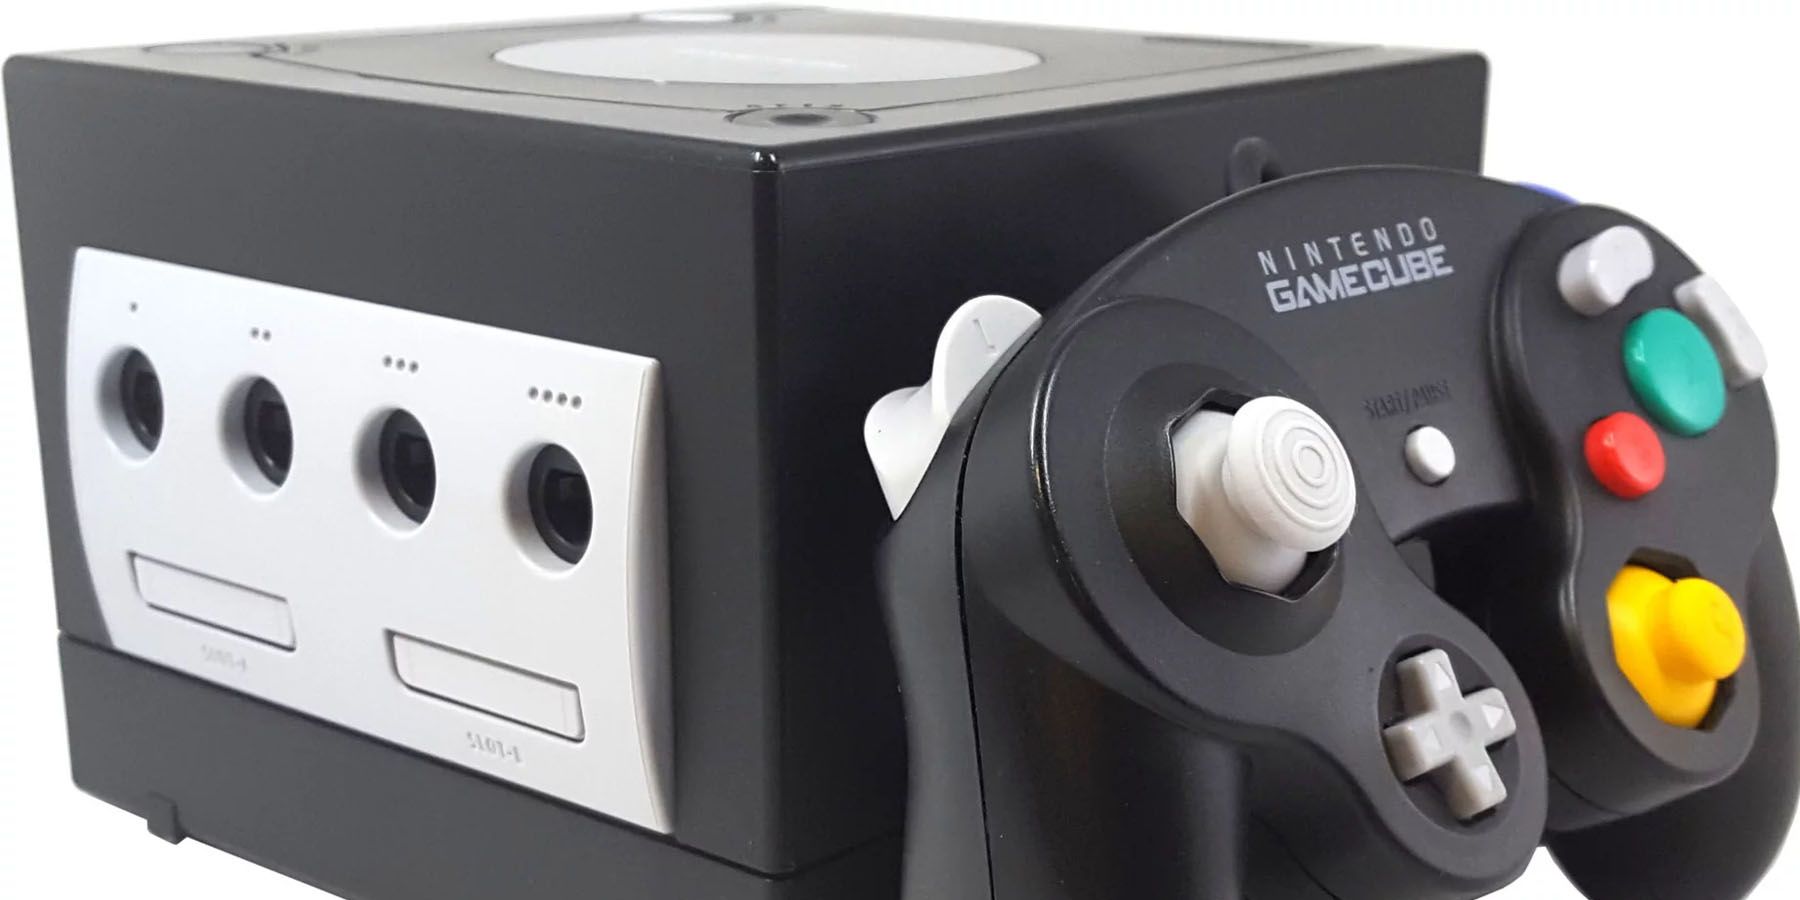 A photo of a black Nintendo GameCube and matching controller against a white background.